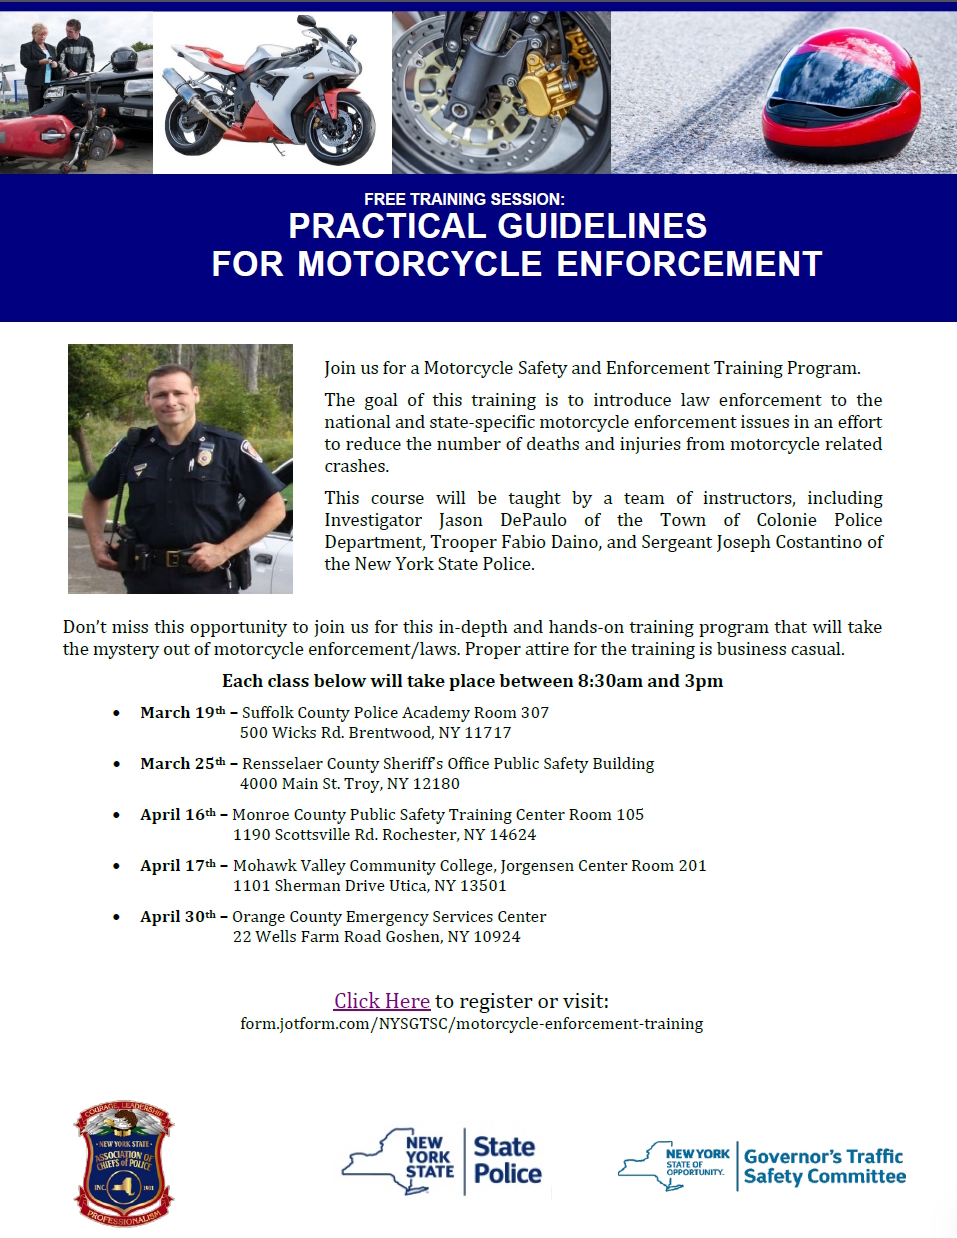 Practical Guidelines for Motorcycle Enforcement